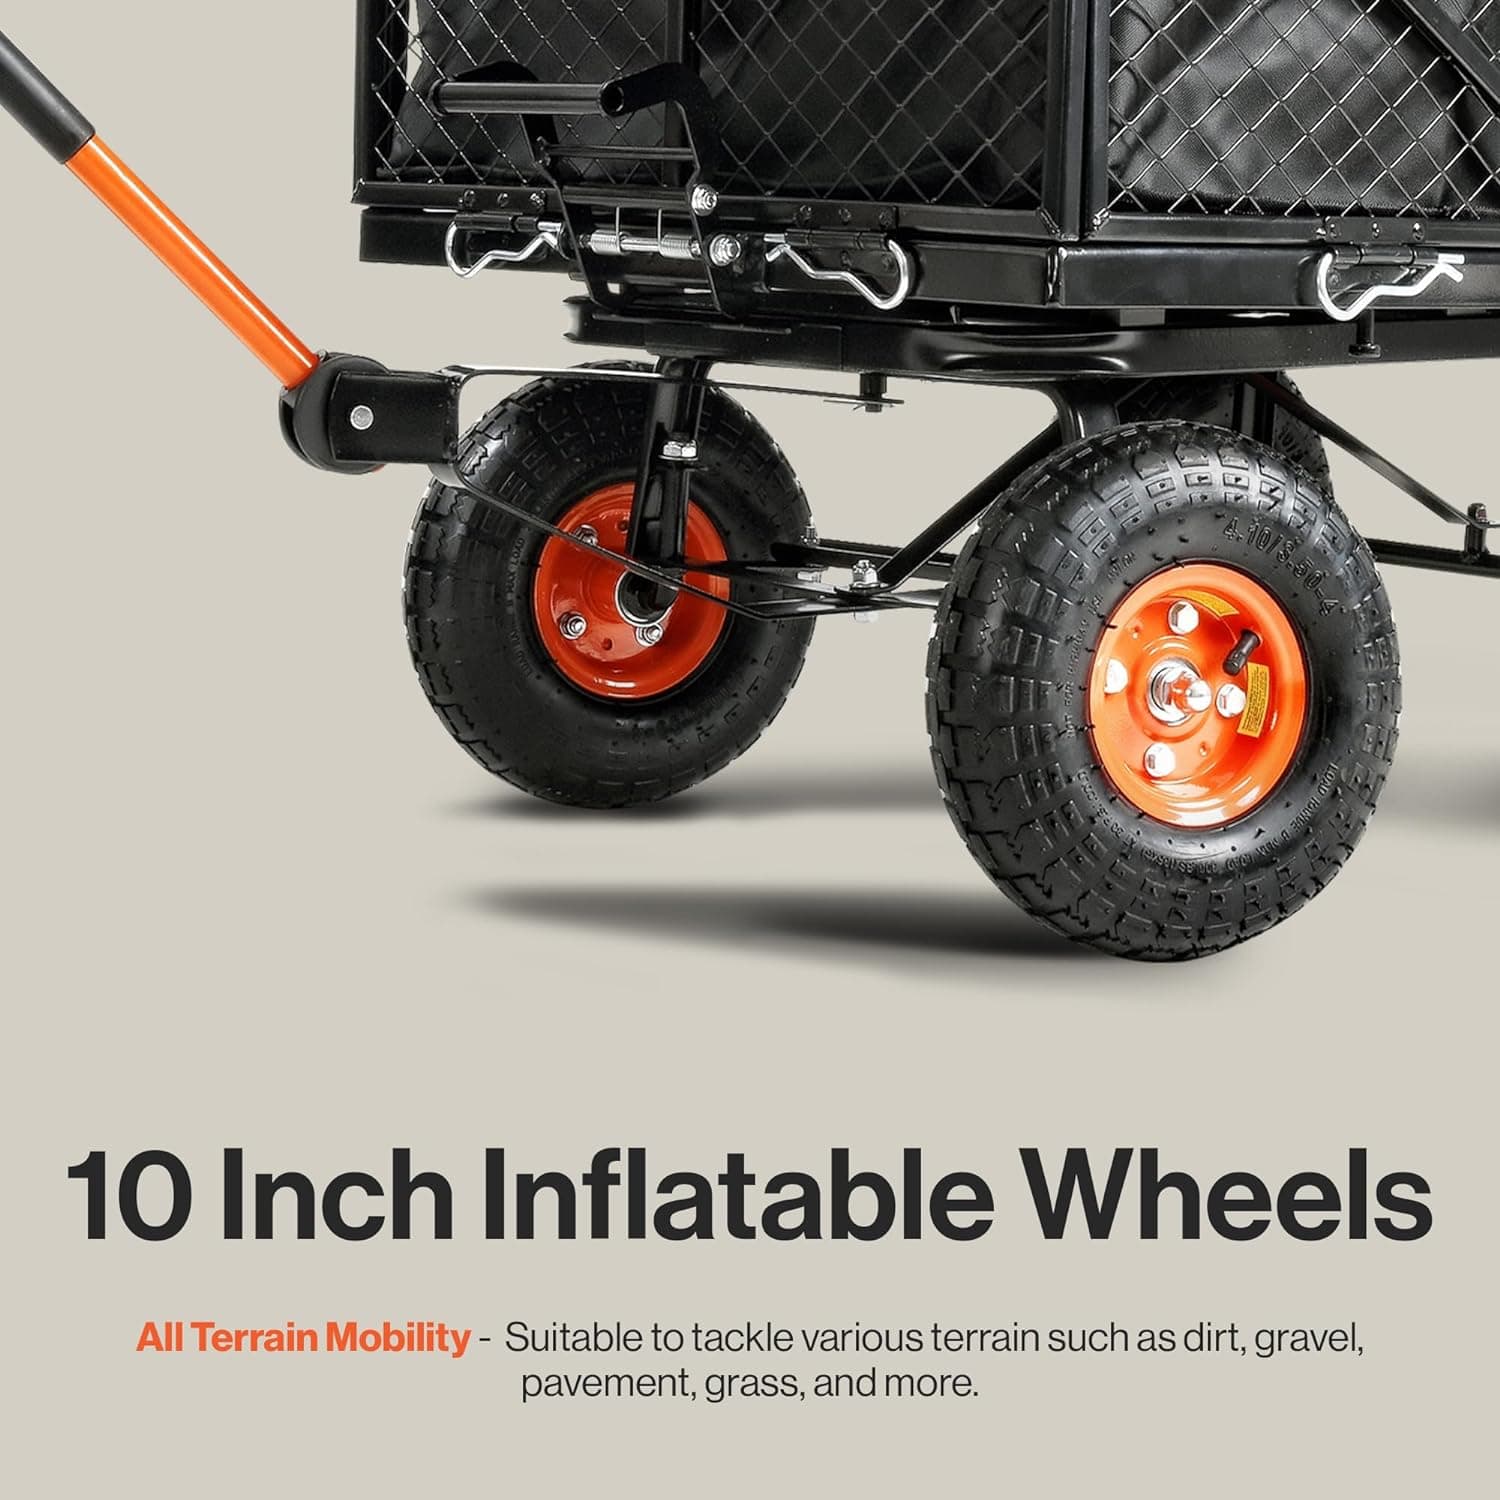 SuperHandy Towable Garden Cart - Quick Dump System, 10" Tires, Connects with Tugger Scooter